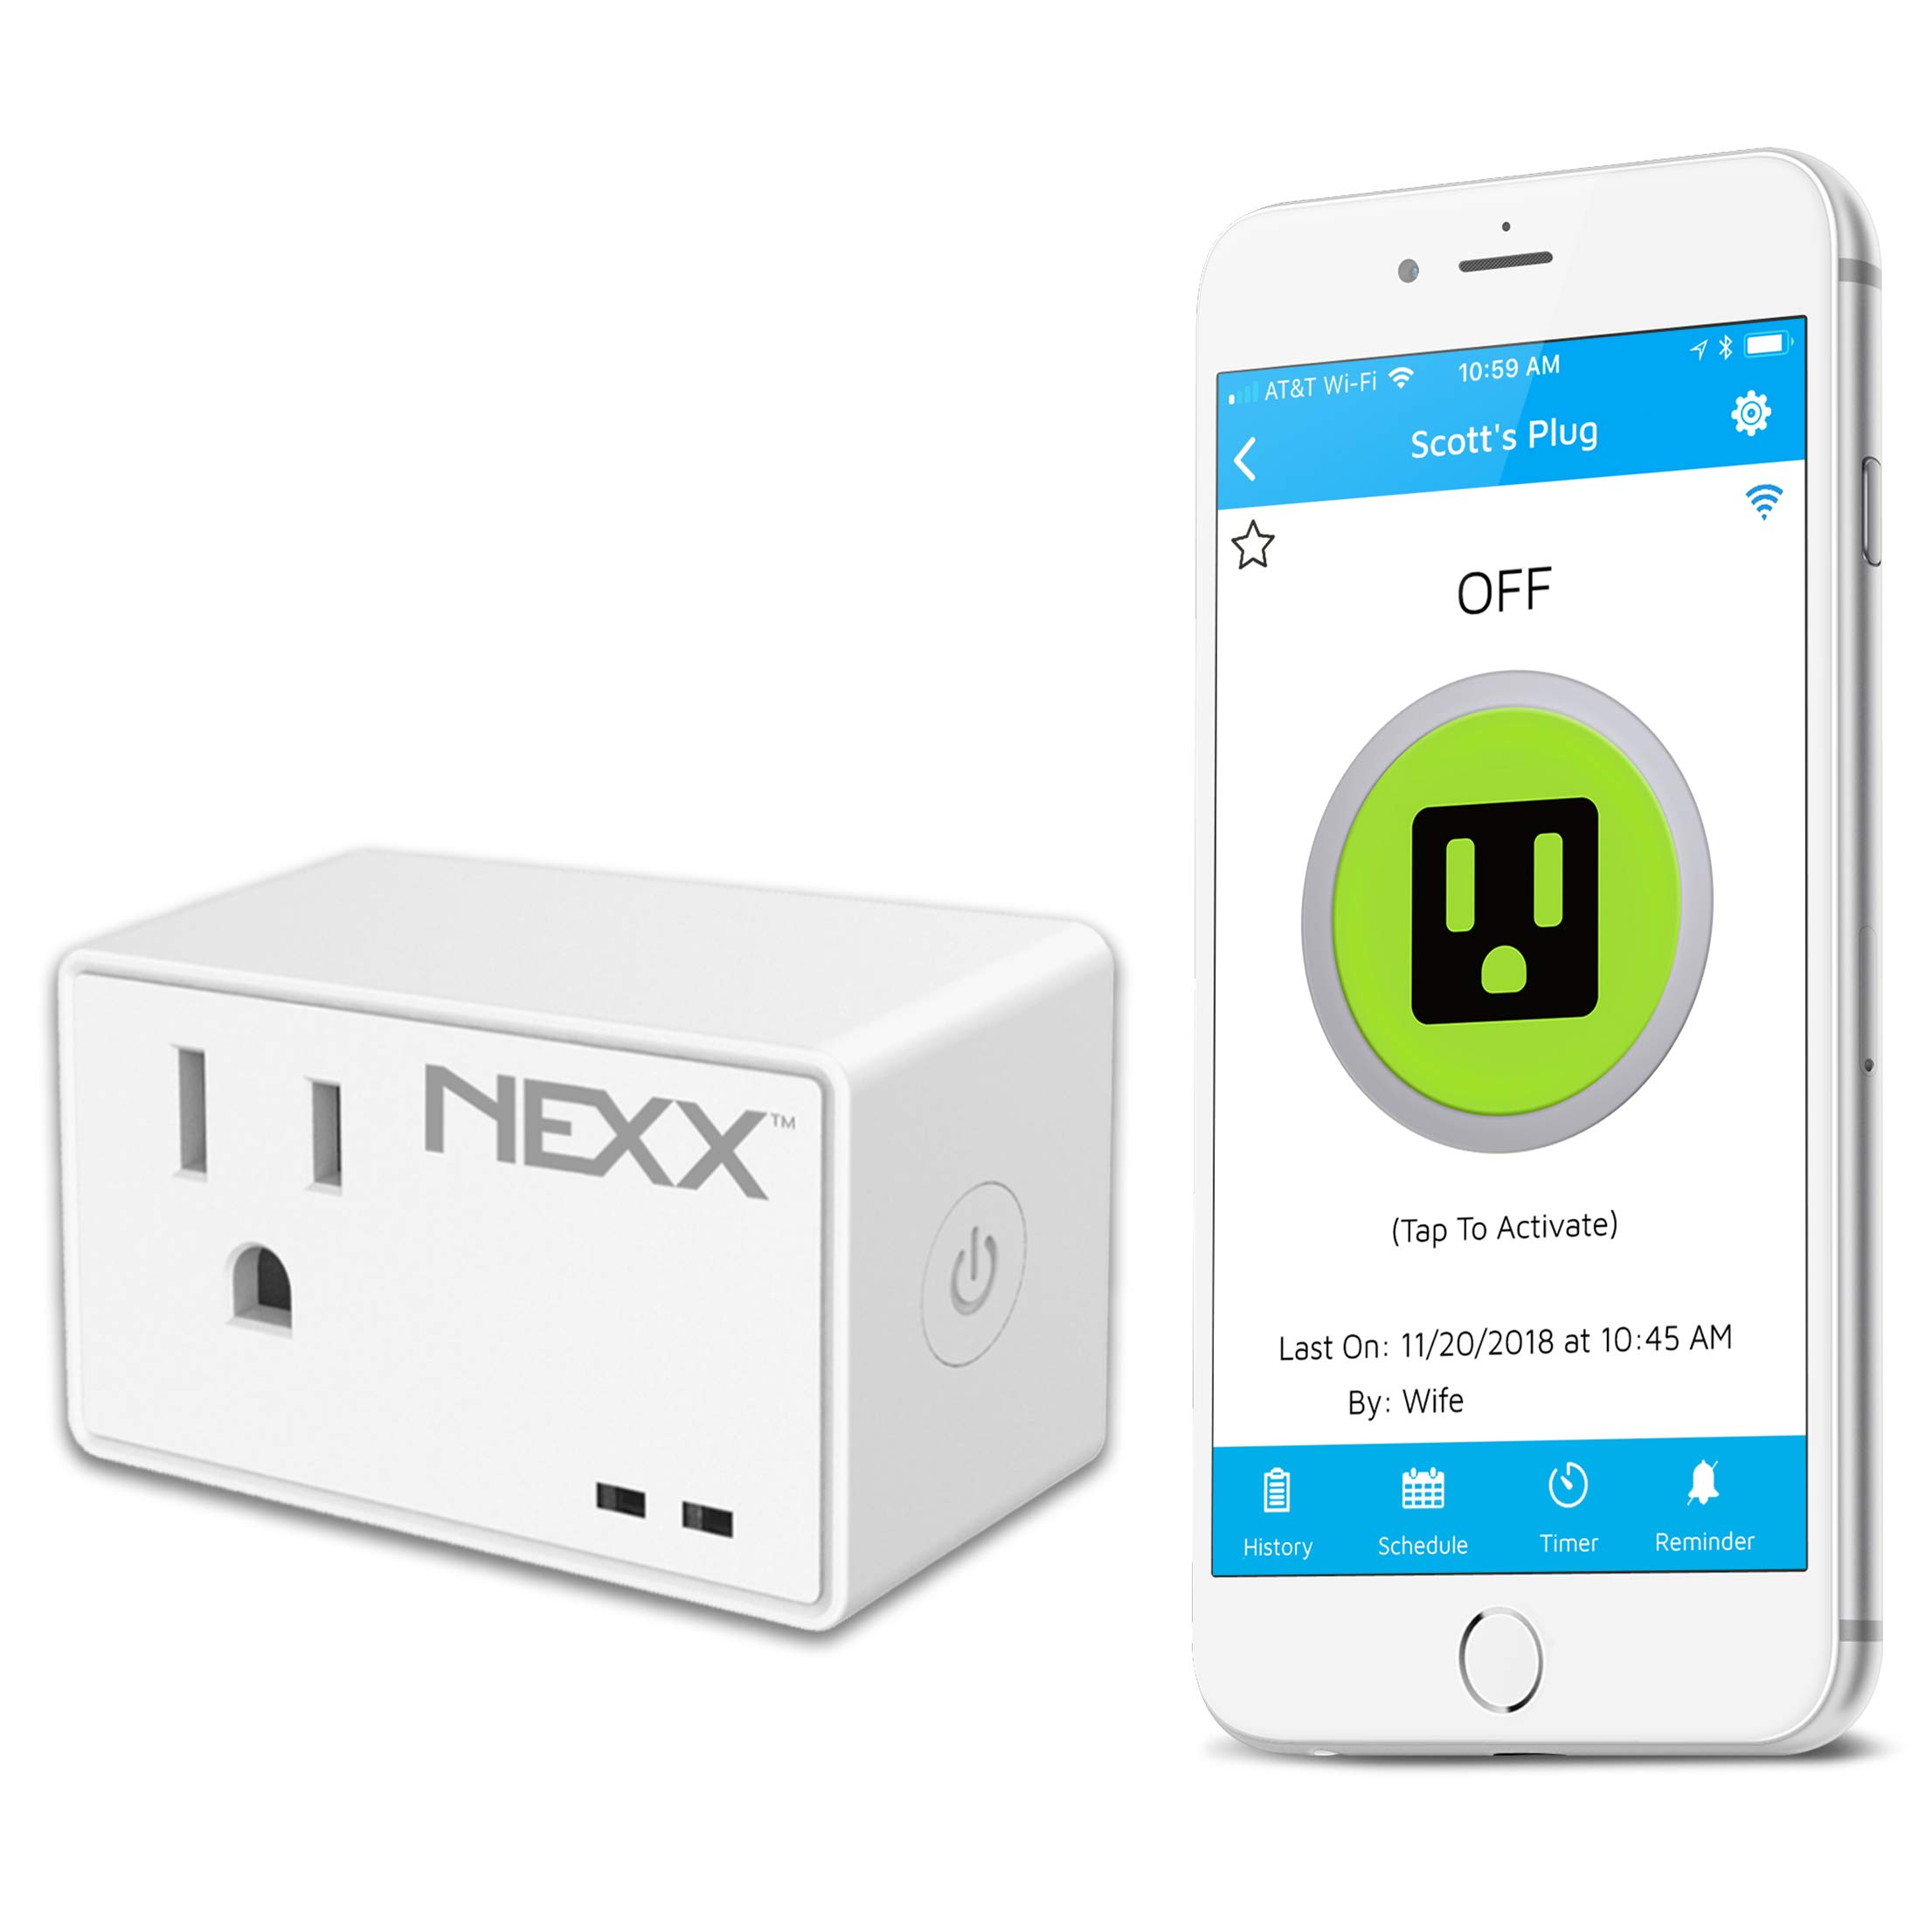 NEXX NXPG-100W WiFi Smart Plug with Geofencing Technology Control, Schedule and Monitor Appliances, TVs, Lamps, and More Using Smartphone, Siri, Amazon Alexa, Google Assistant. No Hub Required, White